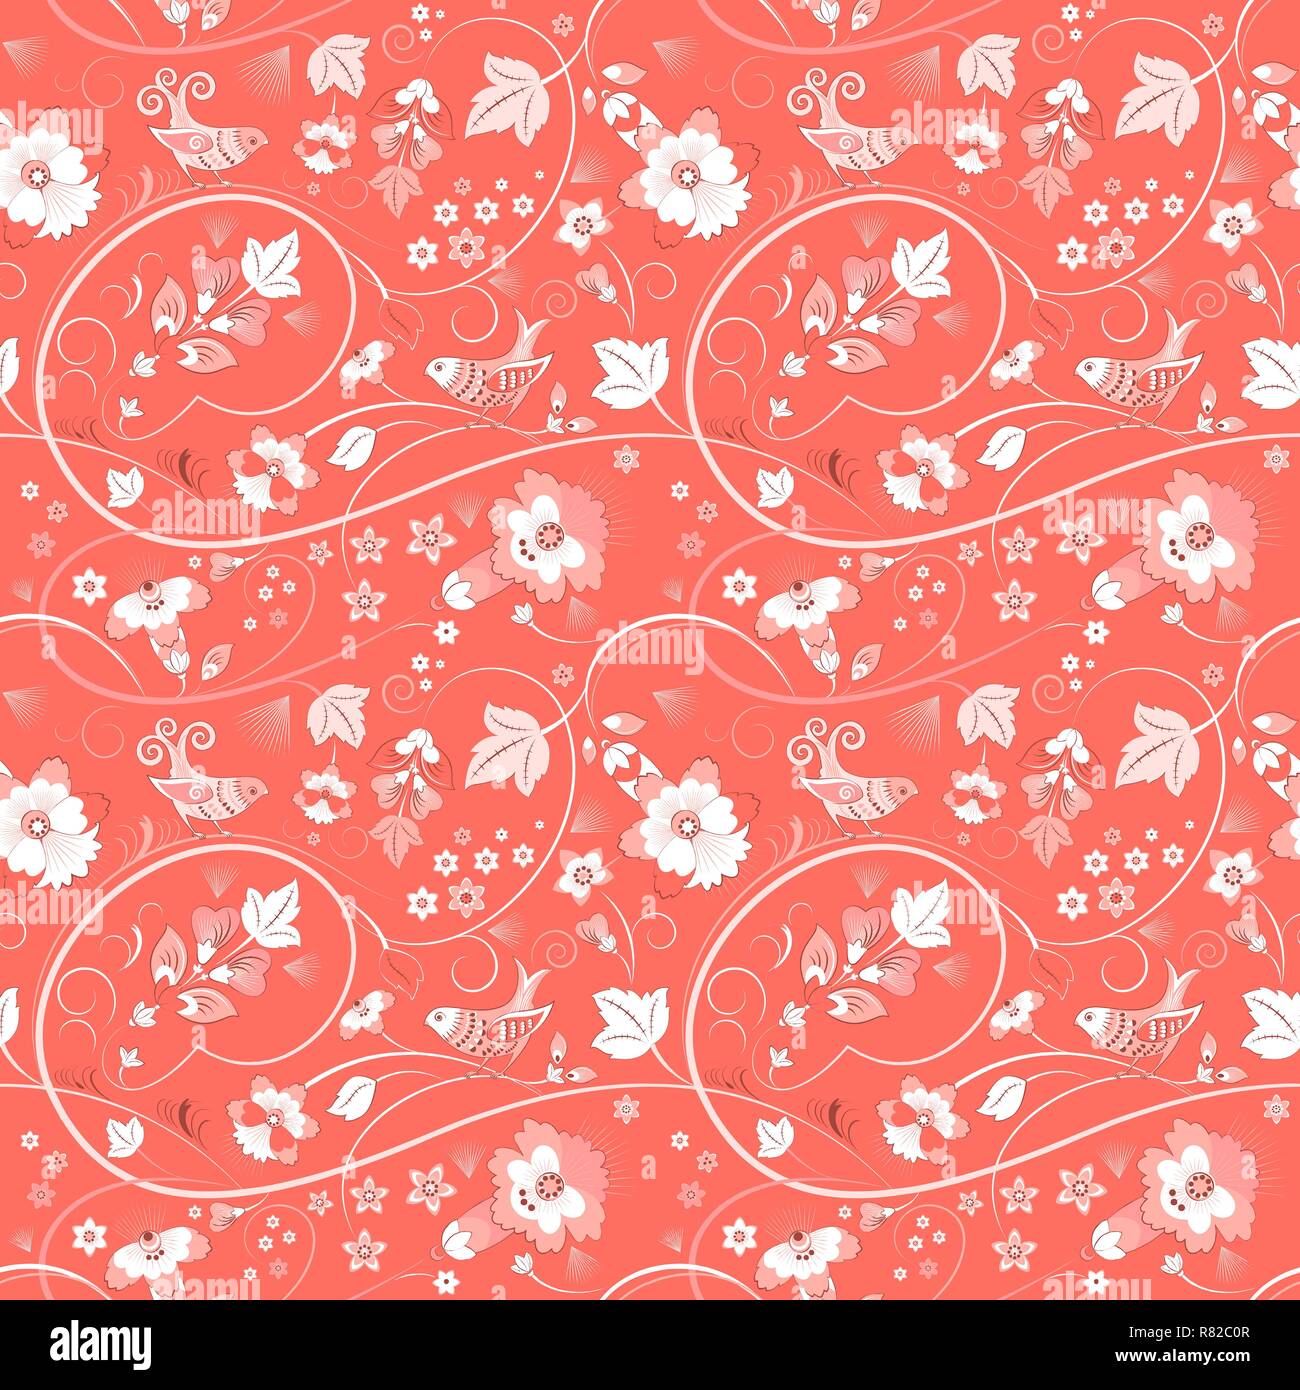 Bird seamless pattern in the living coral color Stock Vector